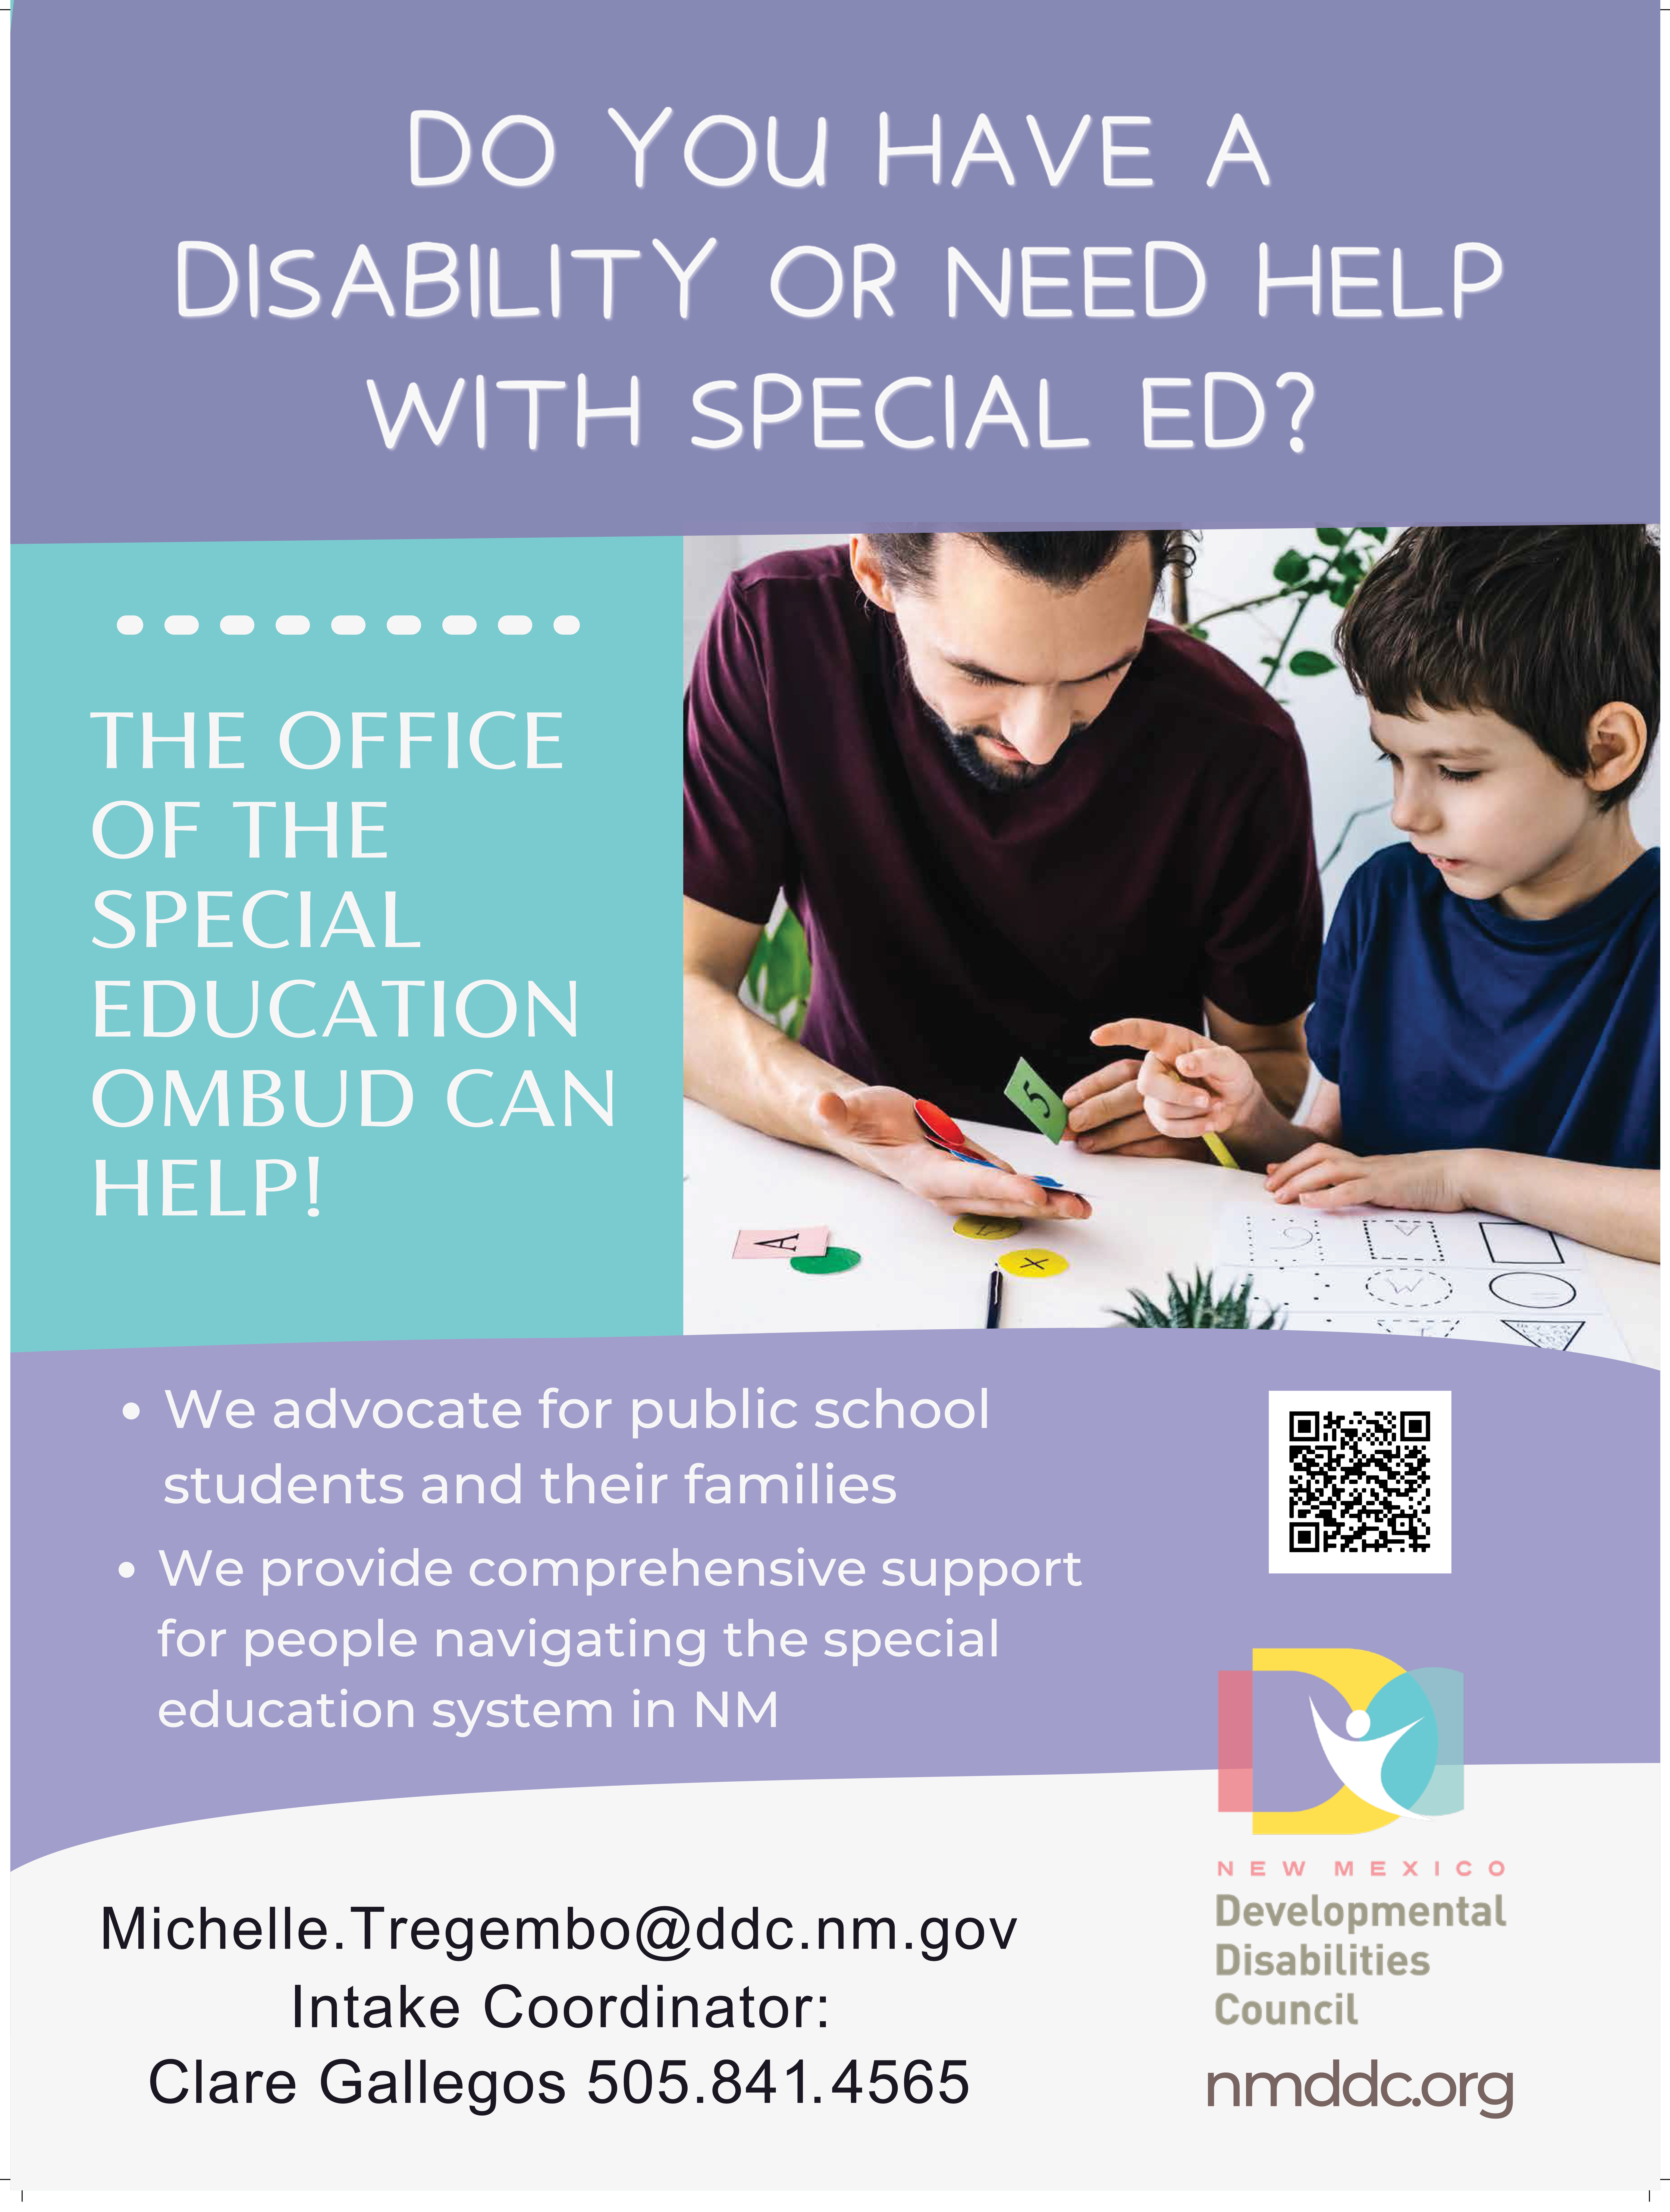 Office of the Special Education Ombud